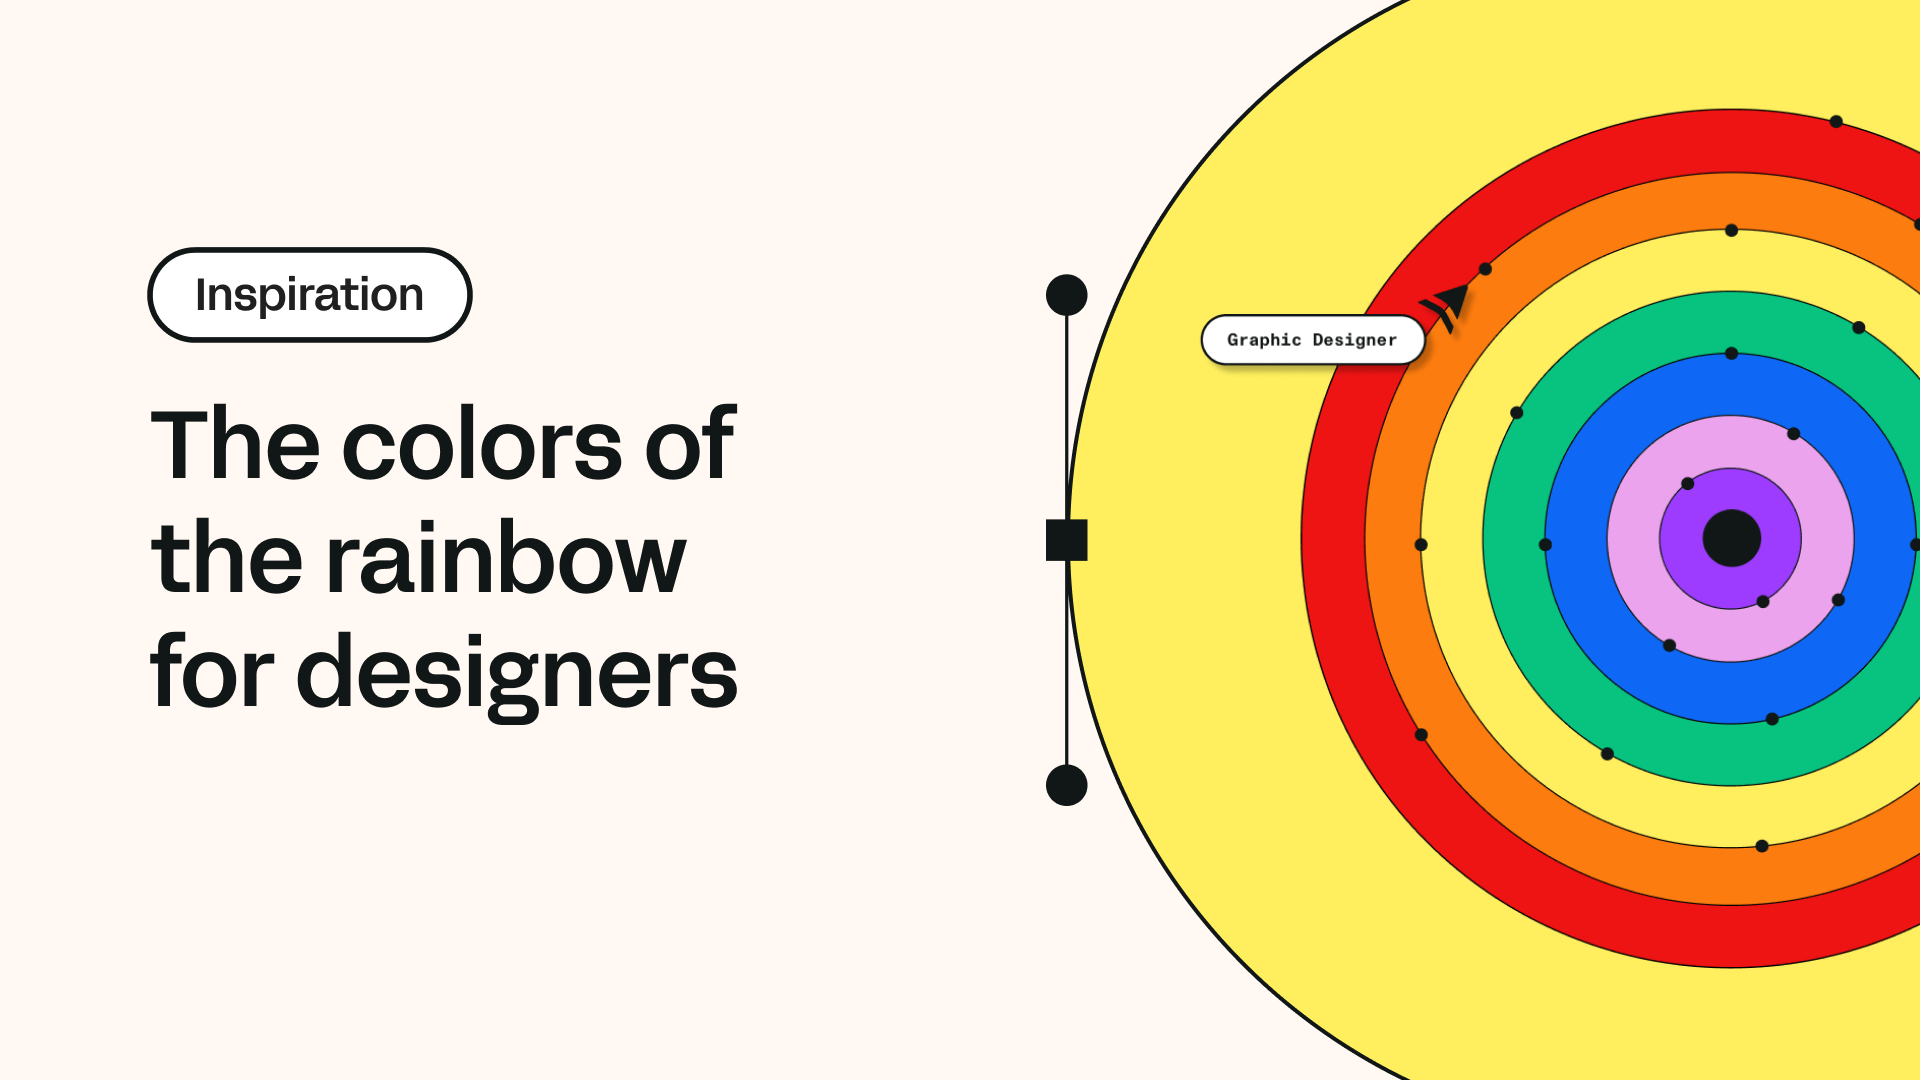 The colors of the rainbow for designers